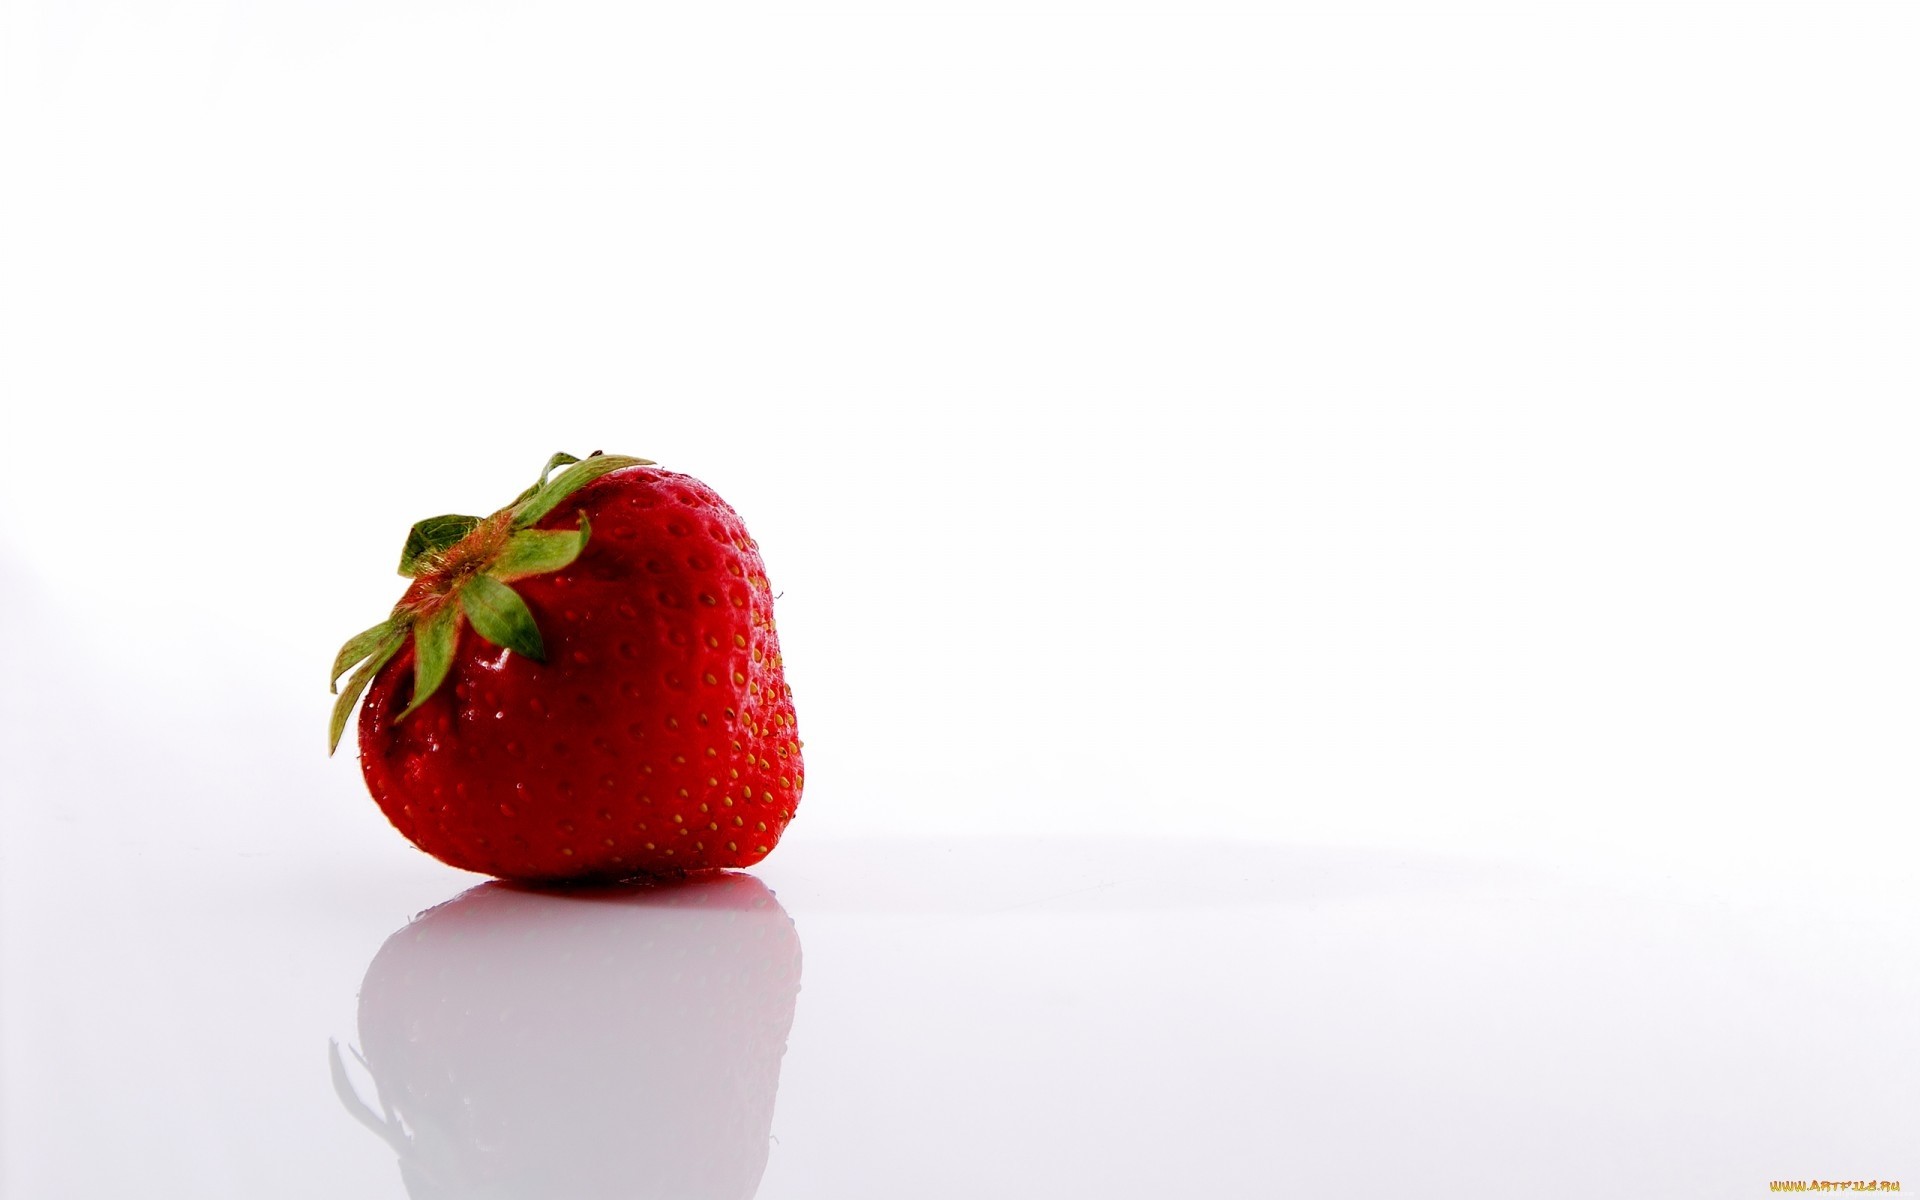 1920x1200 Red strawberry on white background HD Wallpaper -  http://www.hdwallpaperuniverse.